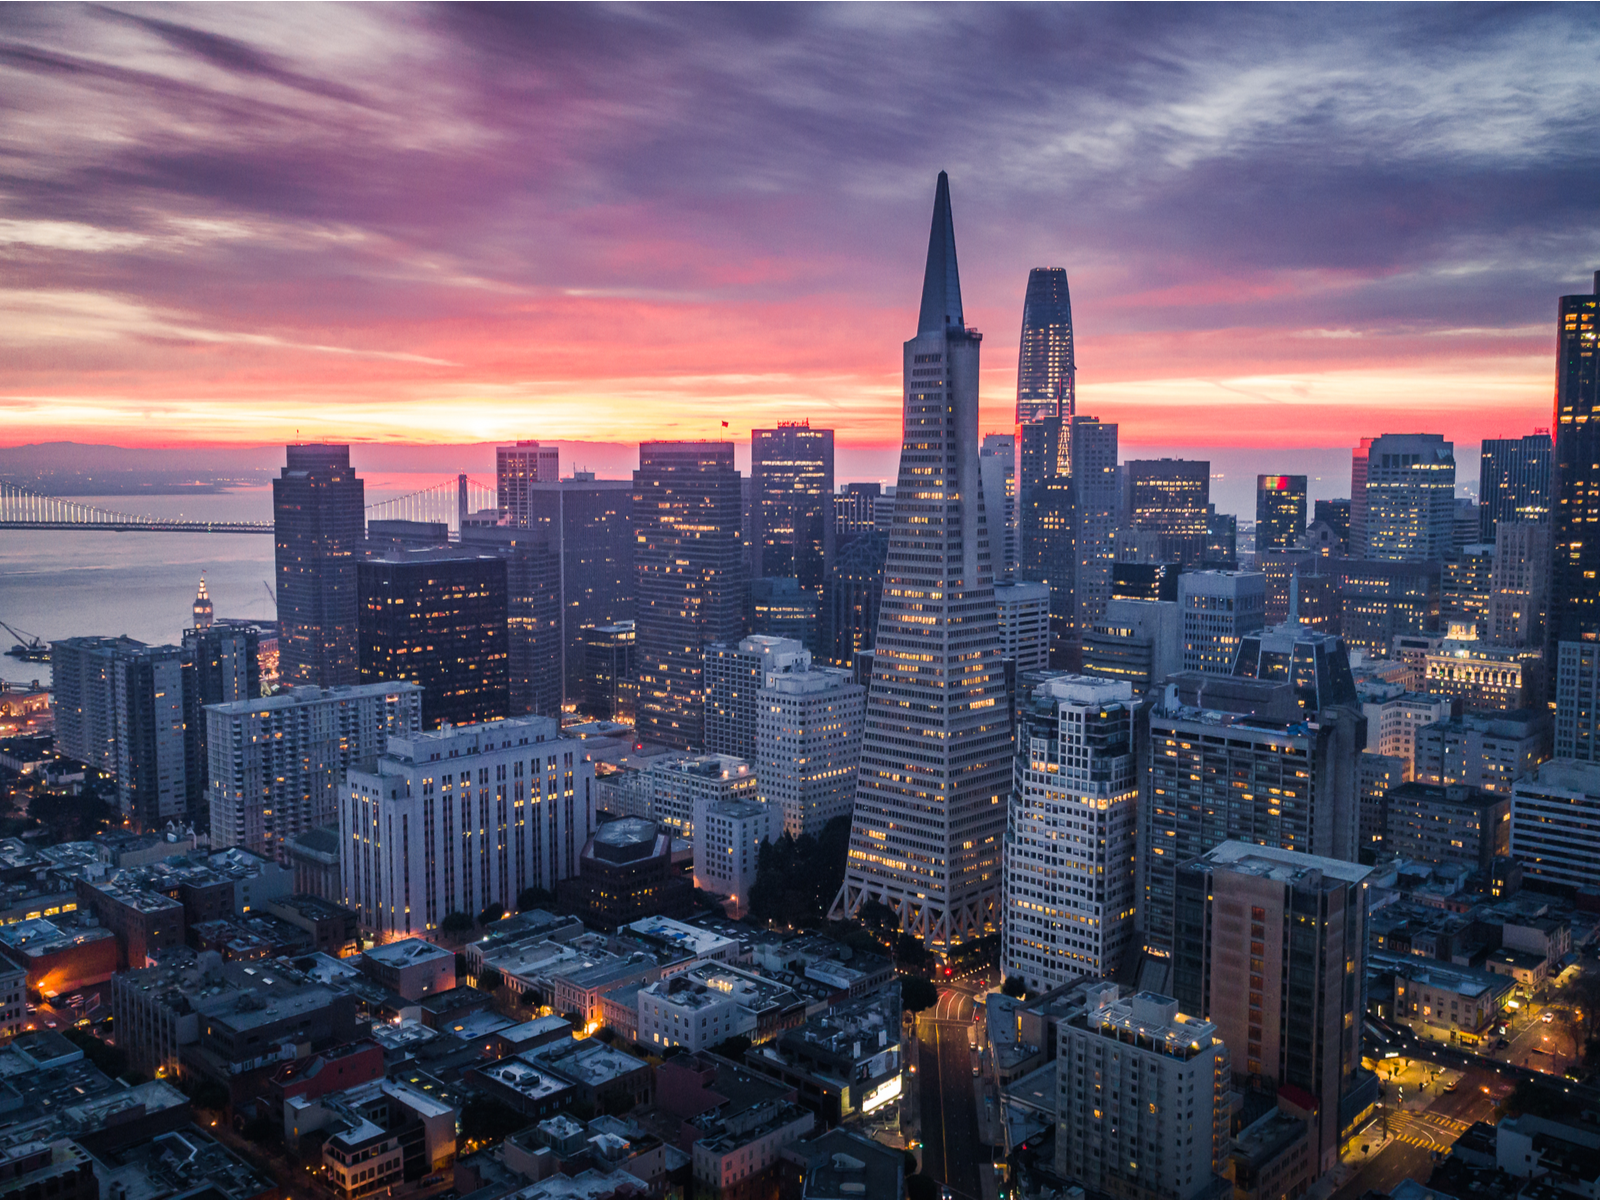 San Francisco skyline and dramatic sunset over city lights, a picture on the best places to visit in San Francisco